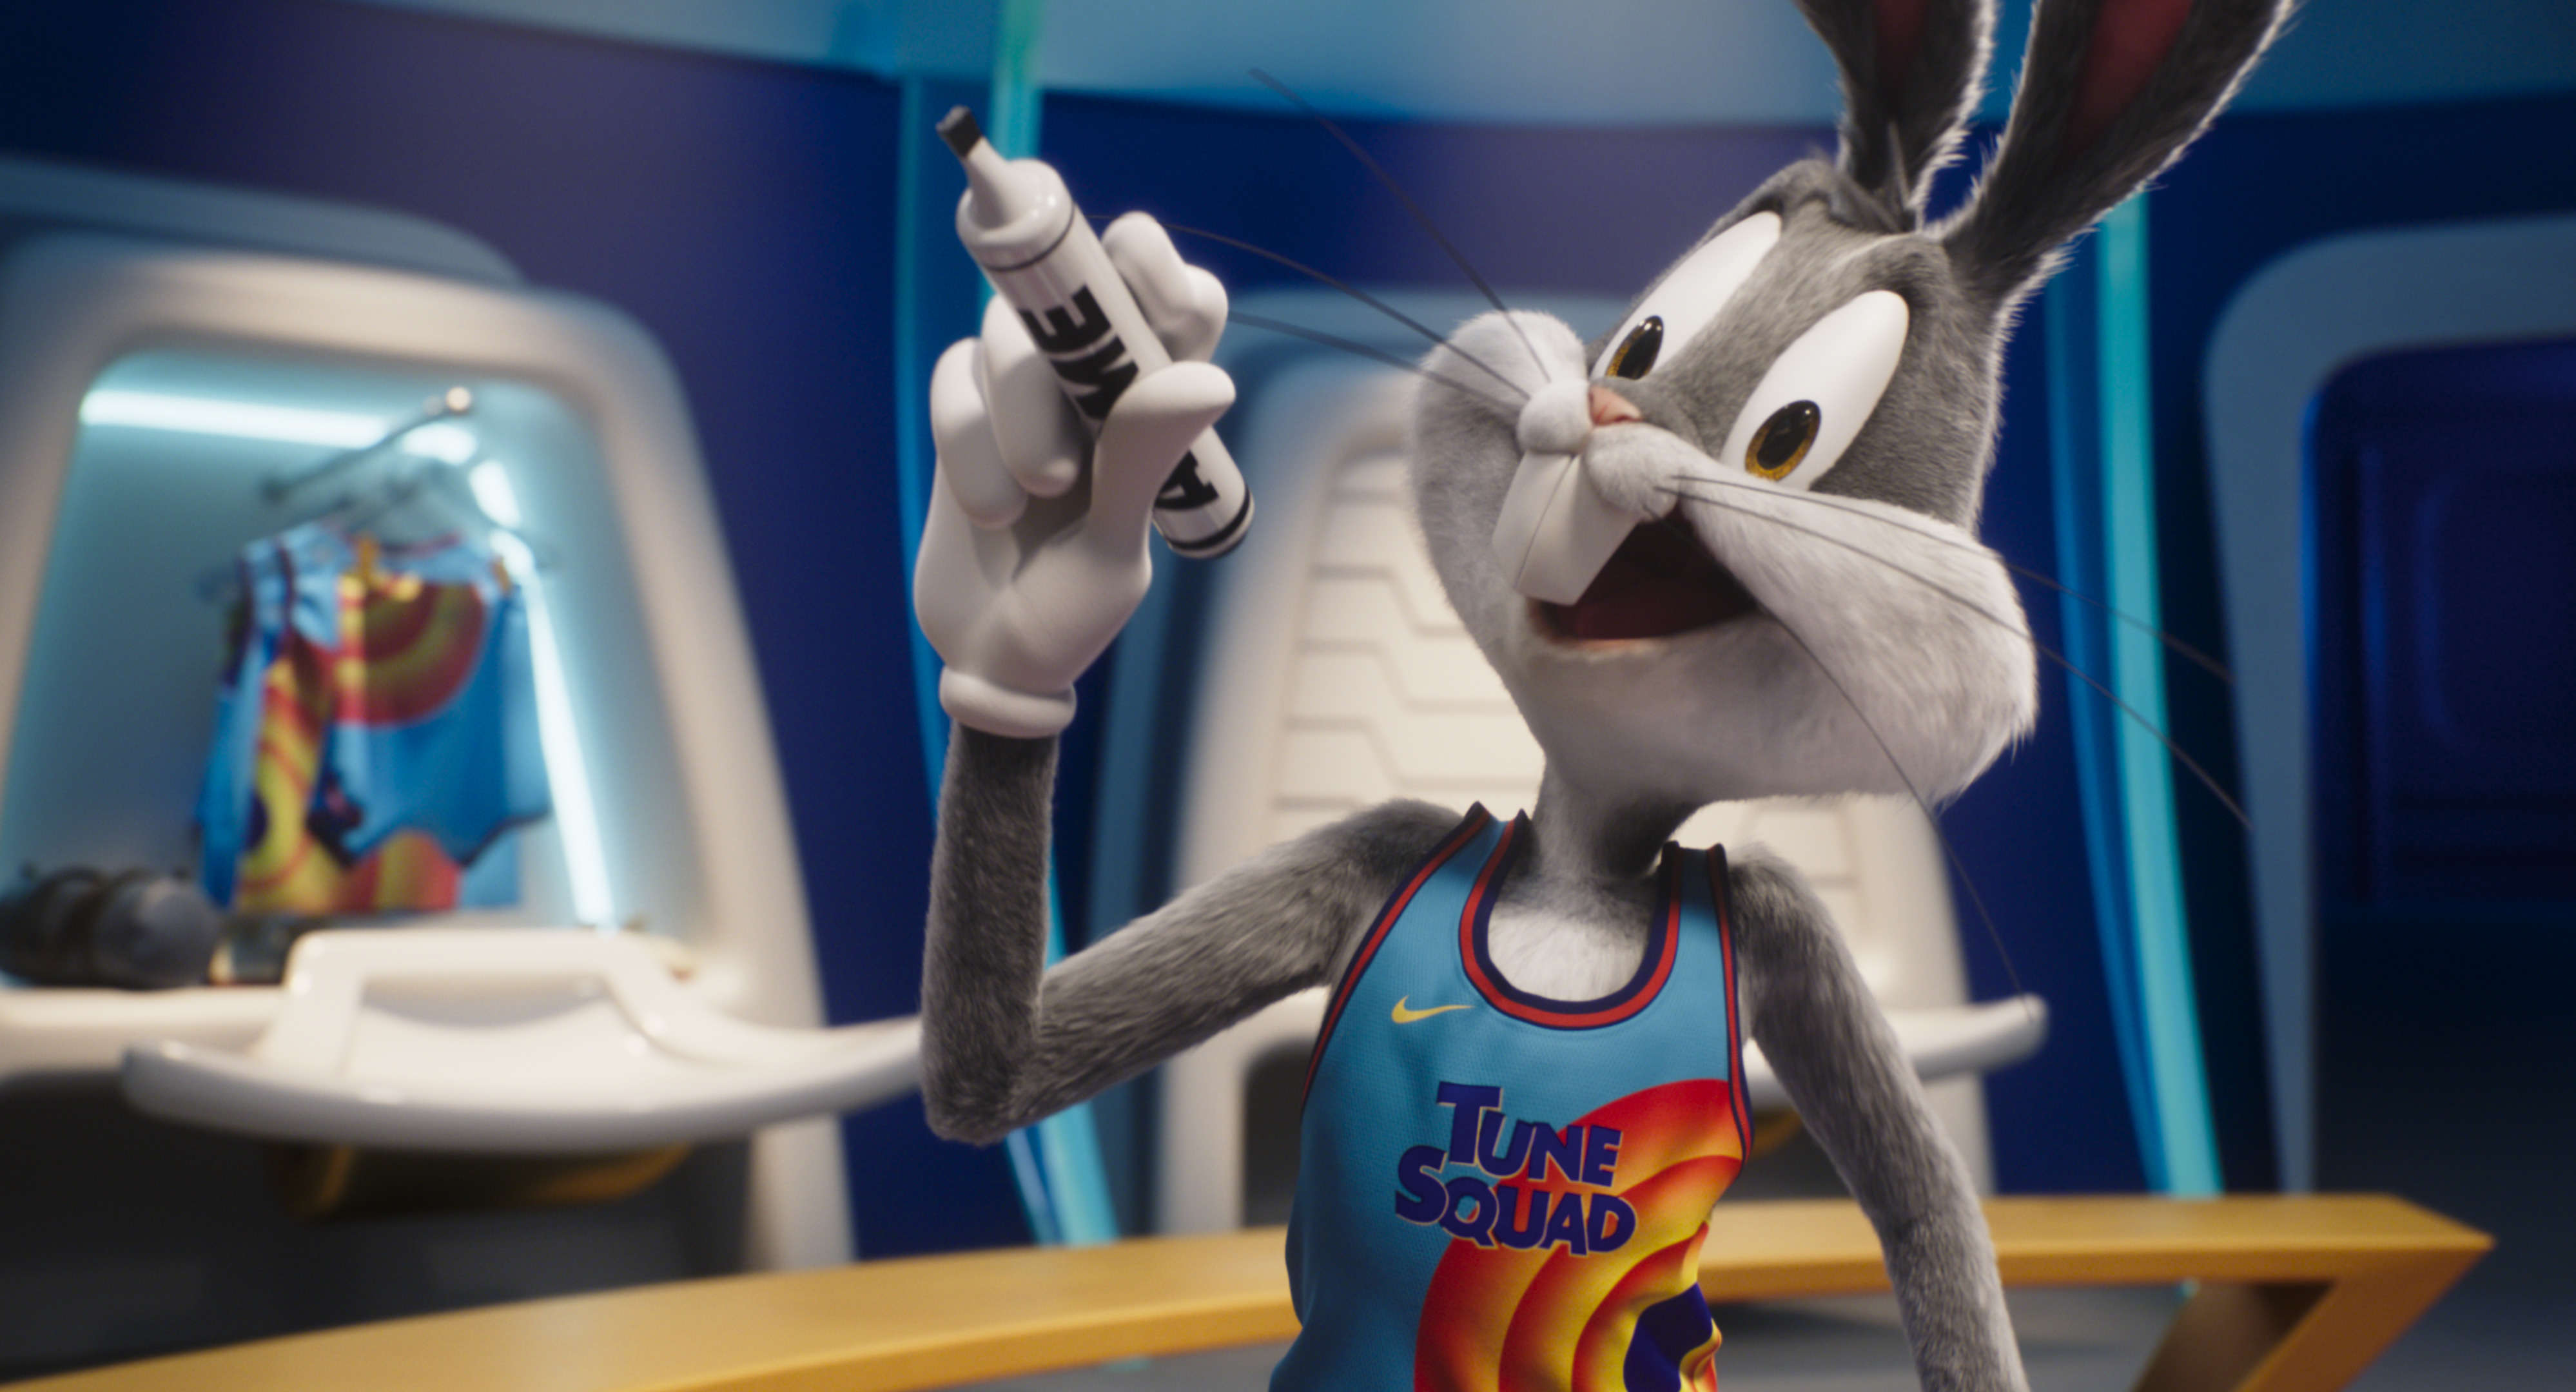 Space Jam: A New Legacy's Bugs Bunny actor knows how to get